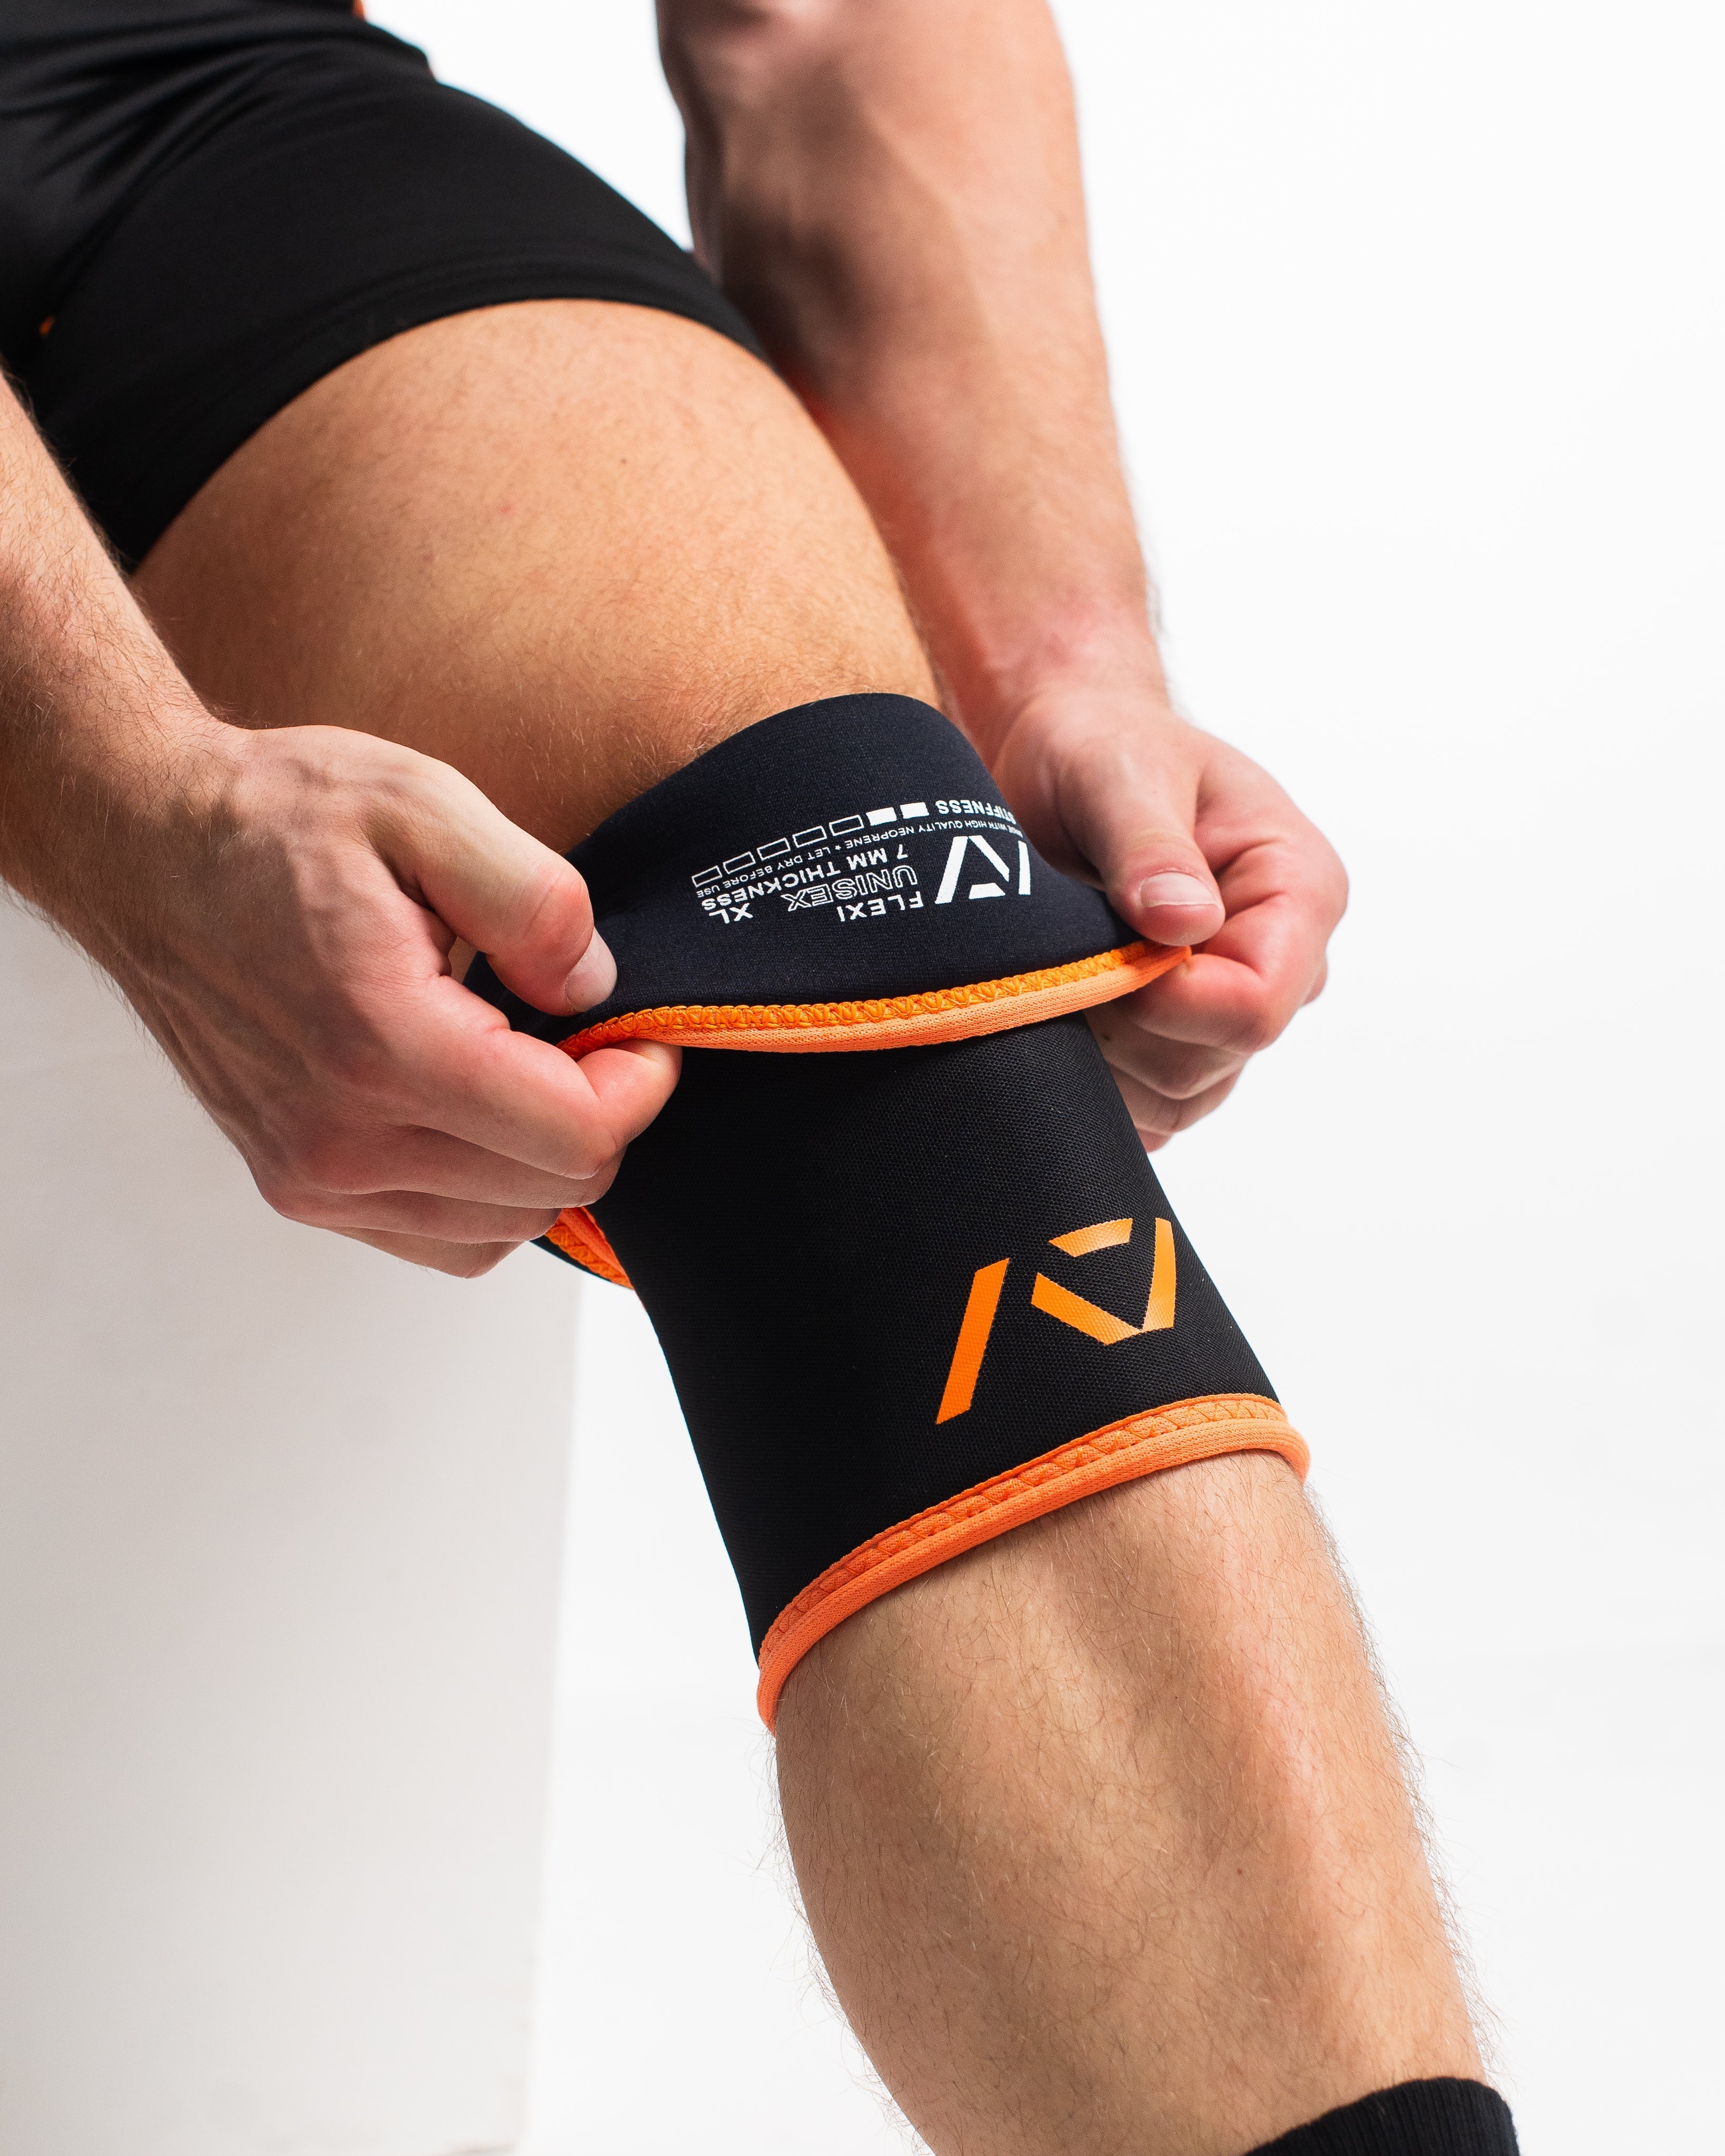 A7 IPF Approved Hourglass Knee Sleeves feature an hourglass-shaped centre taper fit to help provide knee compression while maintaining proper tightness around the calf and quad, offered in three stiffnesses (Flexi, Stiff and Rigor Mortis). Shop the full A7 Powerlifting IPF Approved Equipment collection. The IPF Approved Kit includes Powerlifting Singlet, A7 Meet Shirt, A7 Zebra Wrist Wraps and A7 Deadlift Socks. Genouillères powerlifting shipping to France, Spain, Ireland, Germany, Italy, Sweden and EU. 